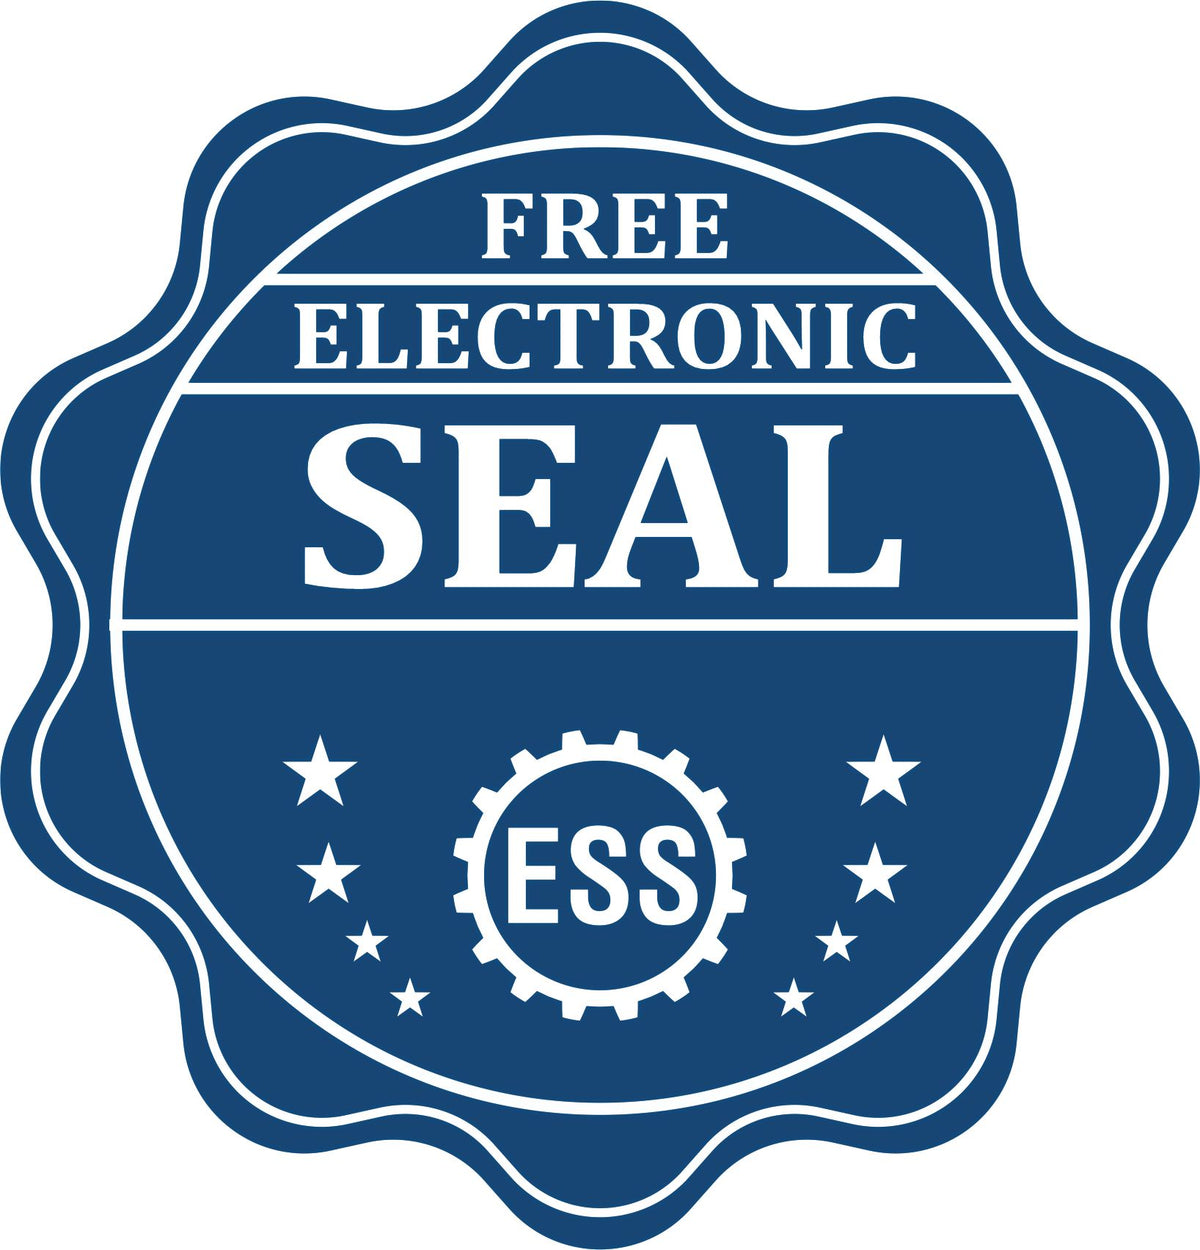 A badge showing a free electronic seal for the Heavy-Duty Kansas Rectangular Notary Stamp with stars and the ESS gear on the emblem.